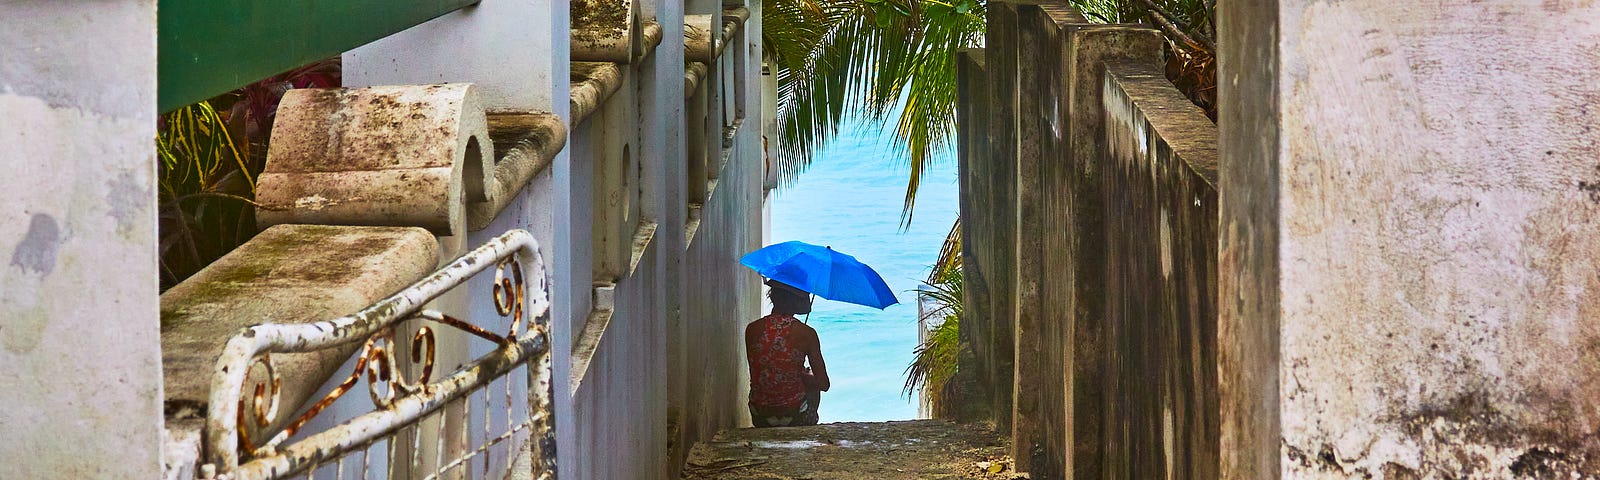 Woman with an umbrella sitting in a narrow alley leading to the beach in Barbados